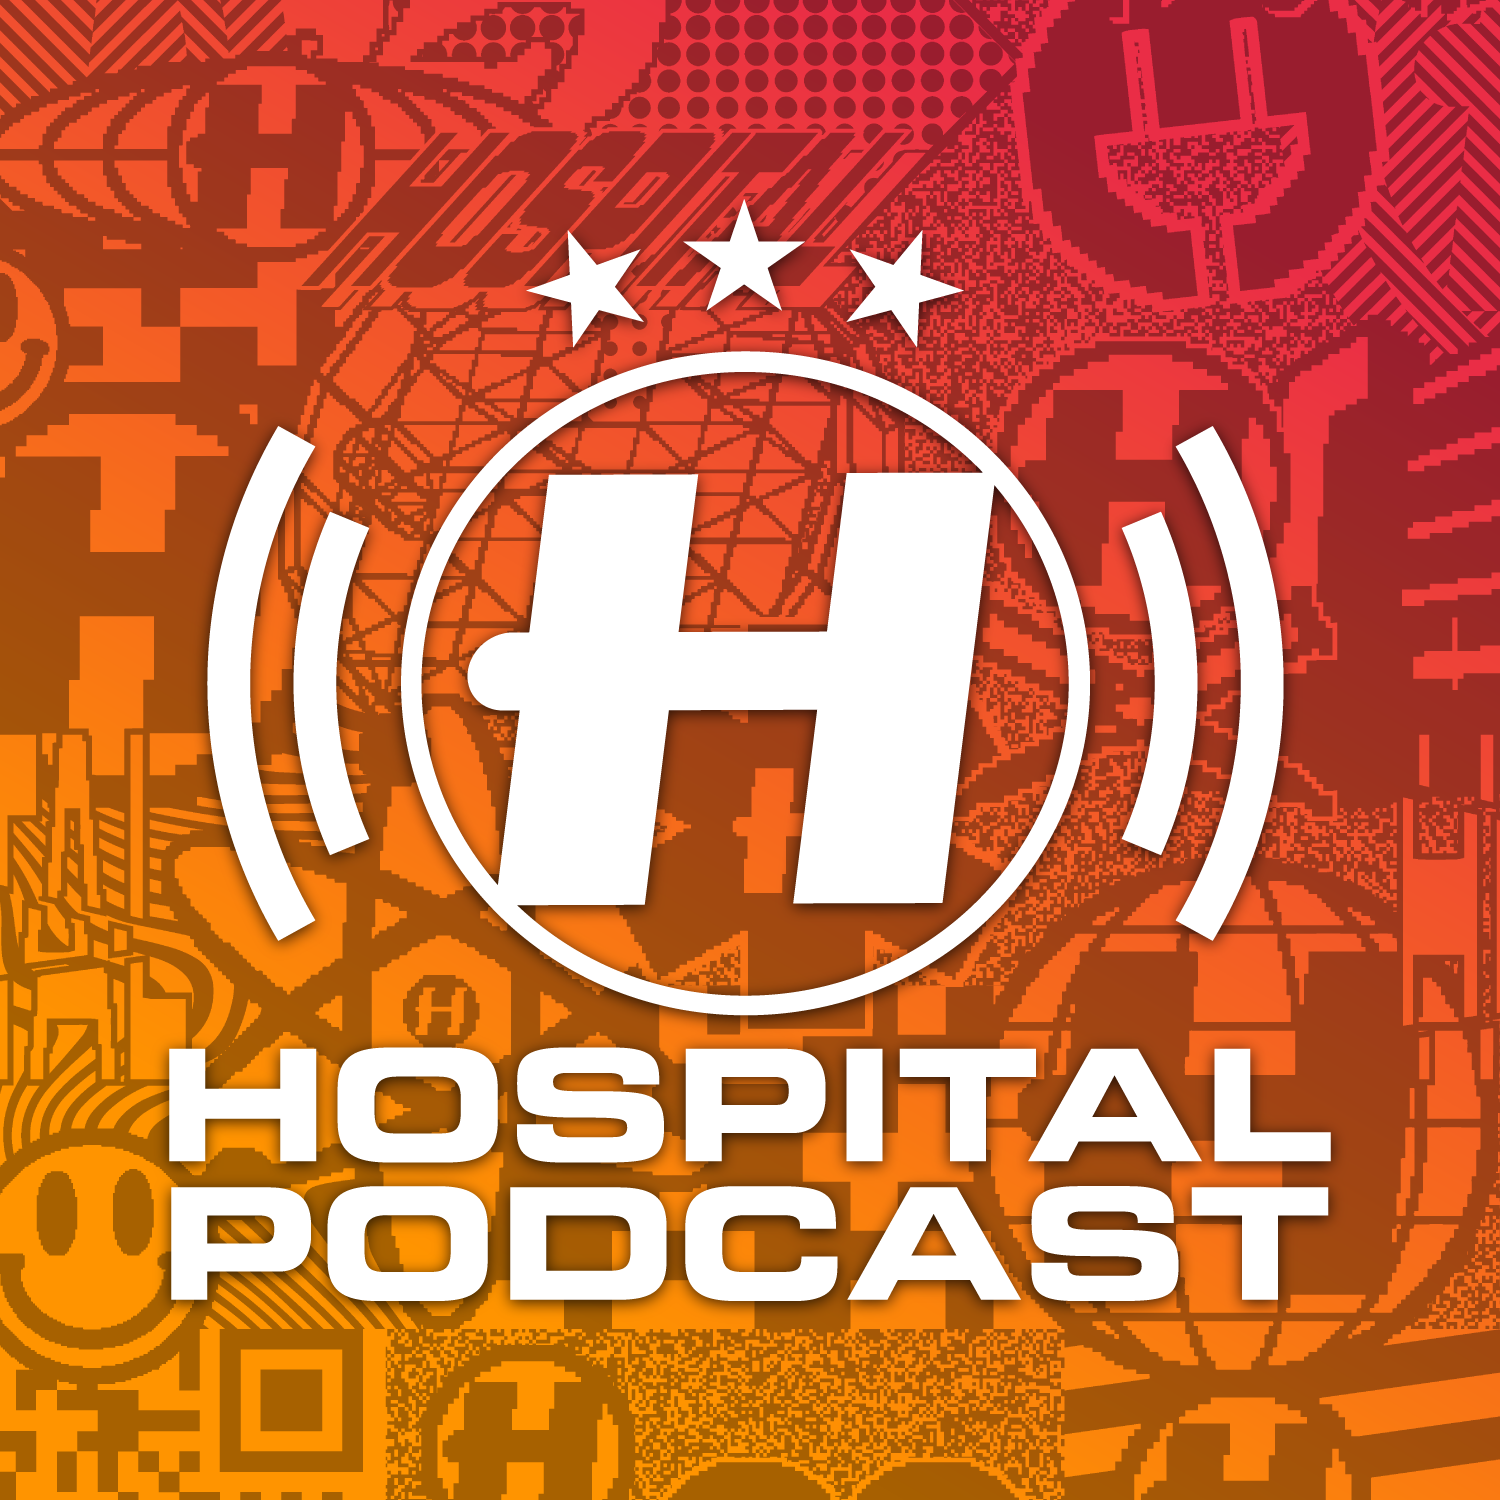 Hospital Podcast 419 with London Electricity  Artwork